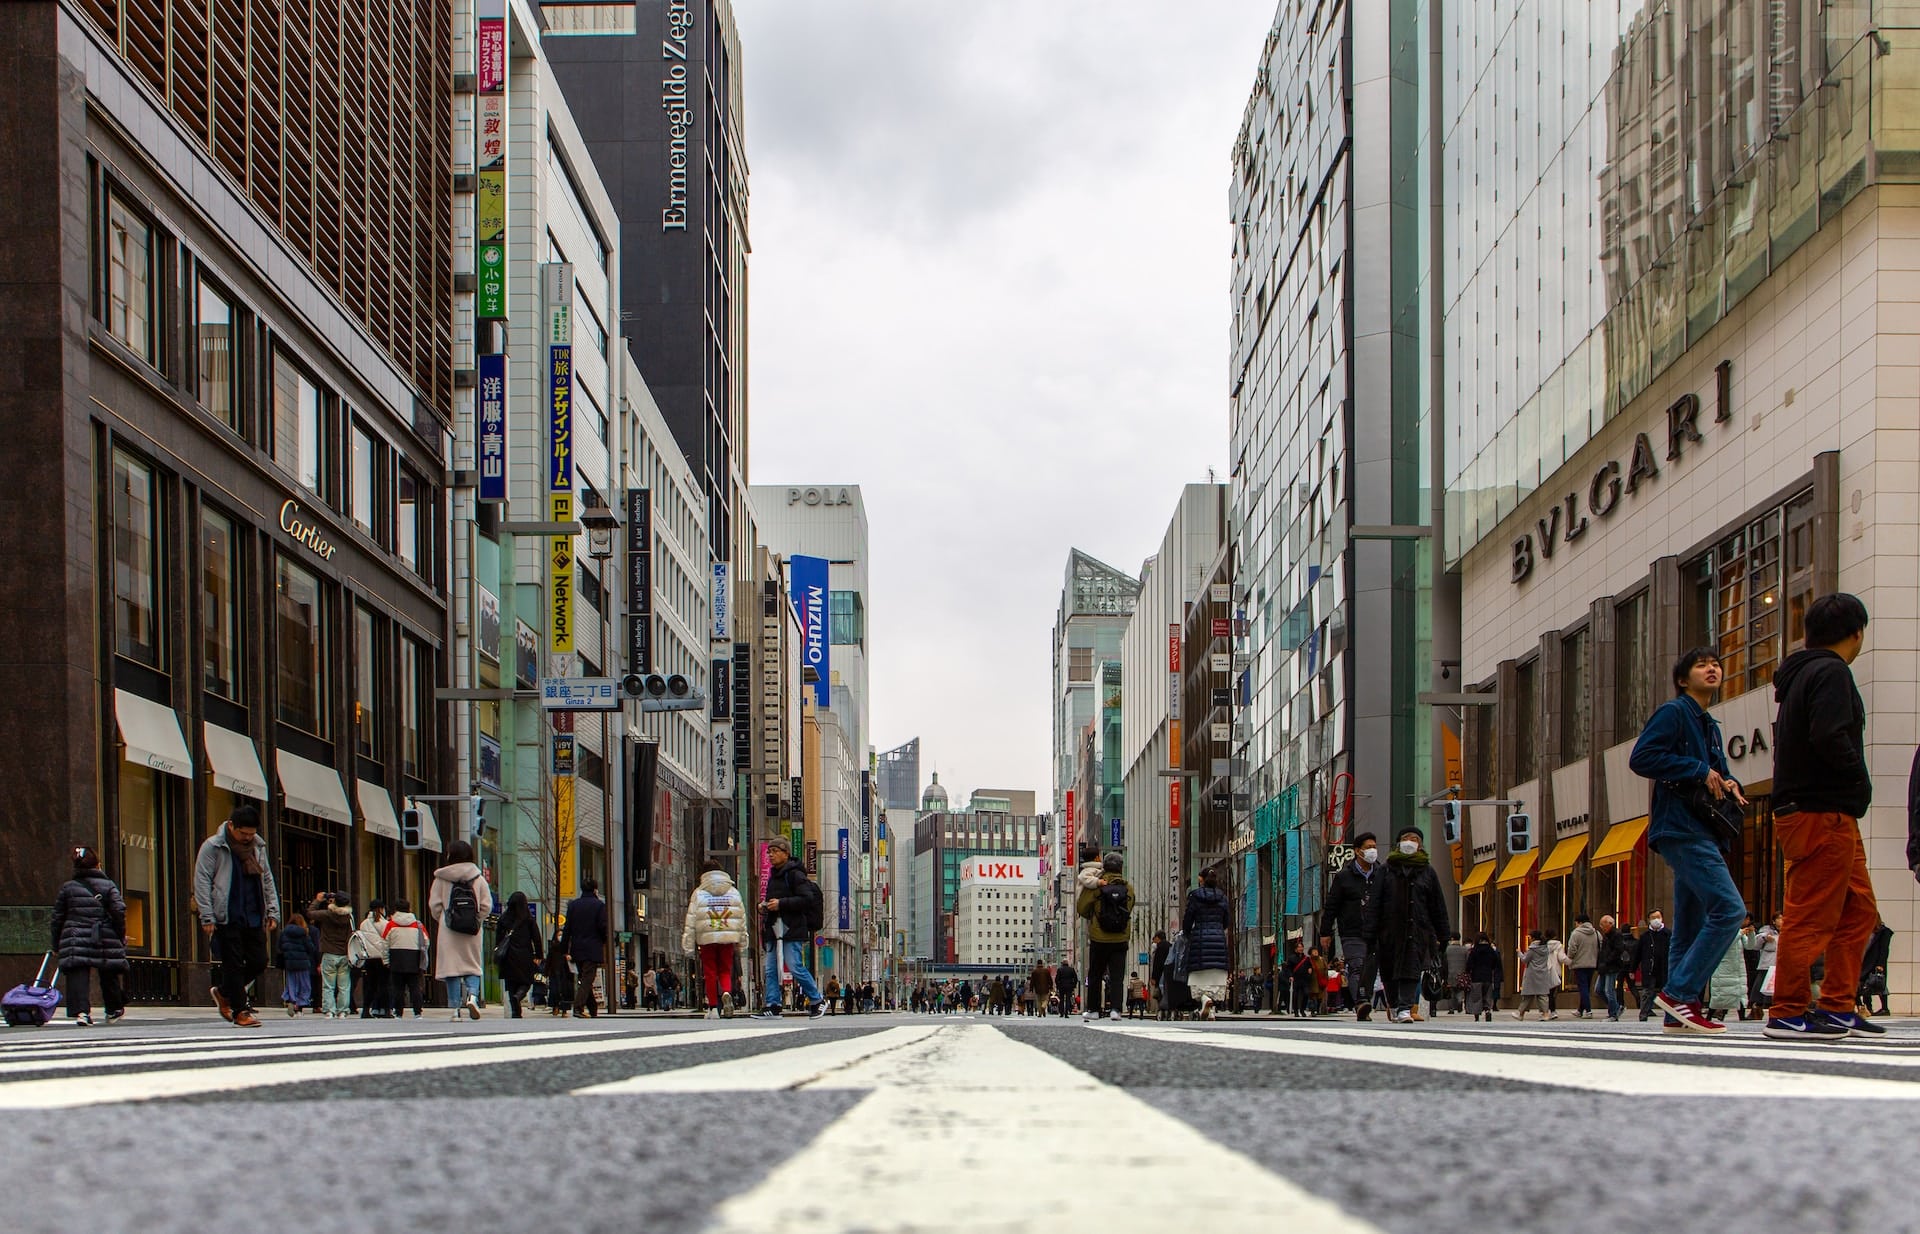 Known for its upscale luxury shops, Chuo is one of the best areas to stay in Tokyo, Japan